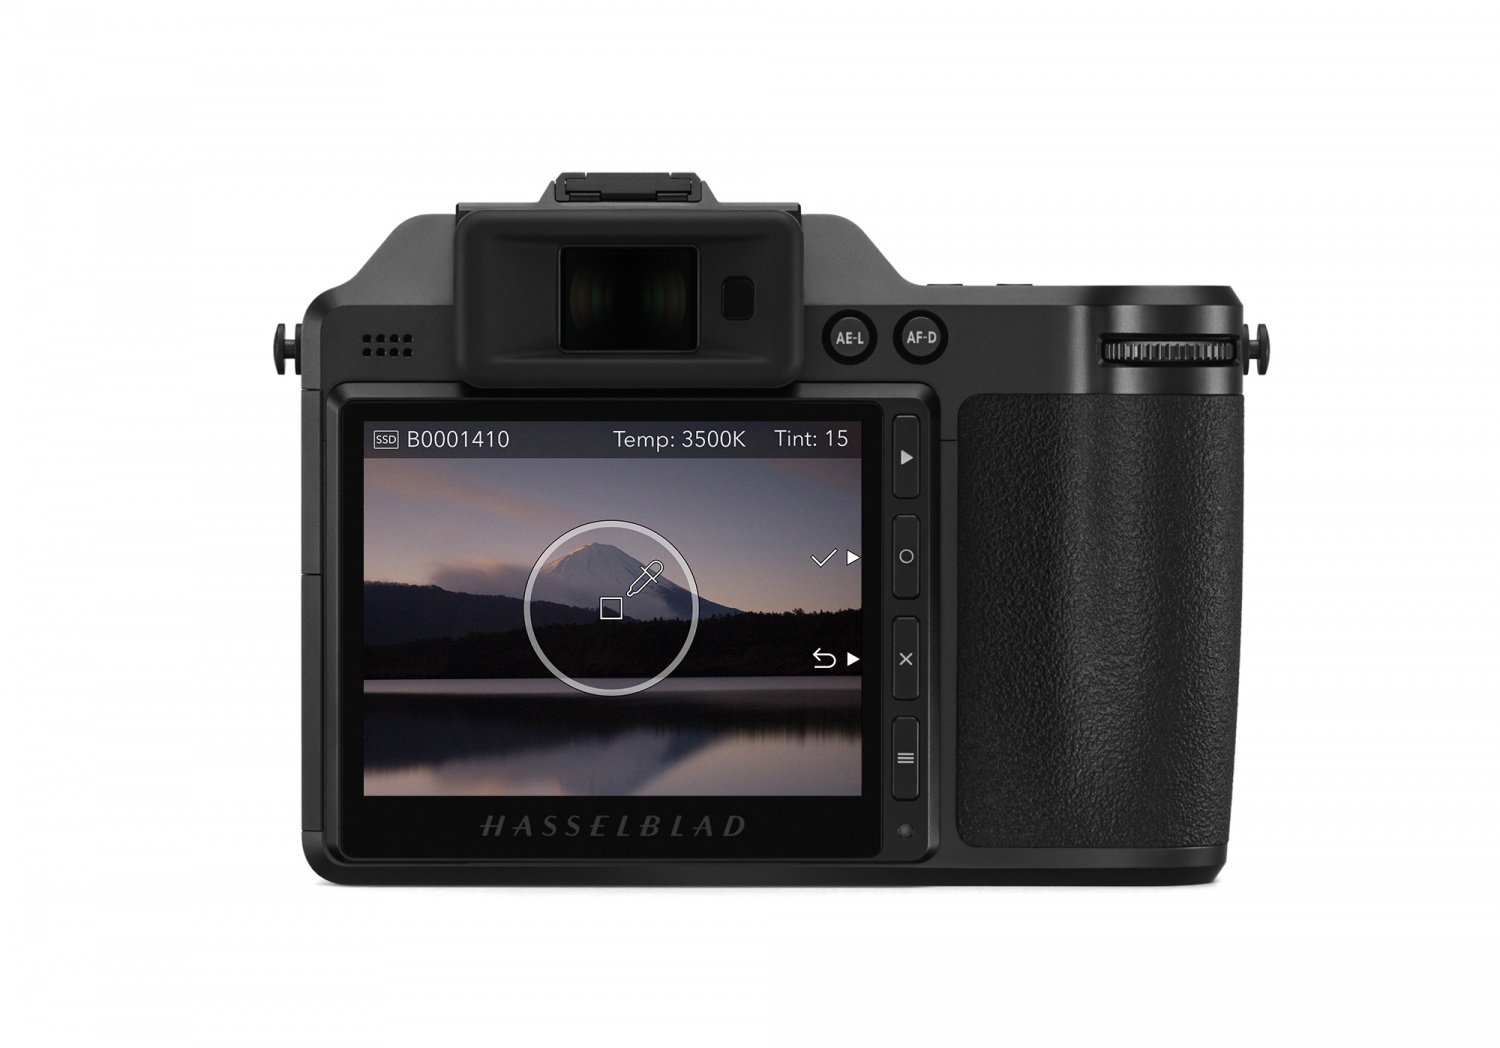 Hasselblad X2D 100C 2.0.0 Firmware Update Launched: Here's What to Expect